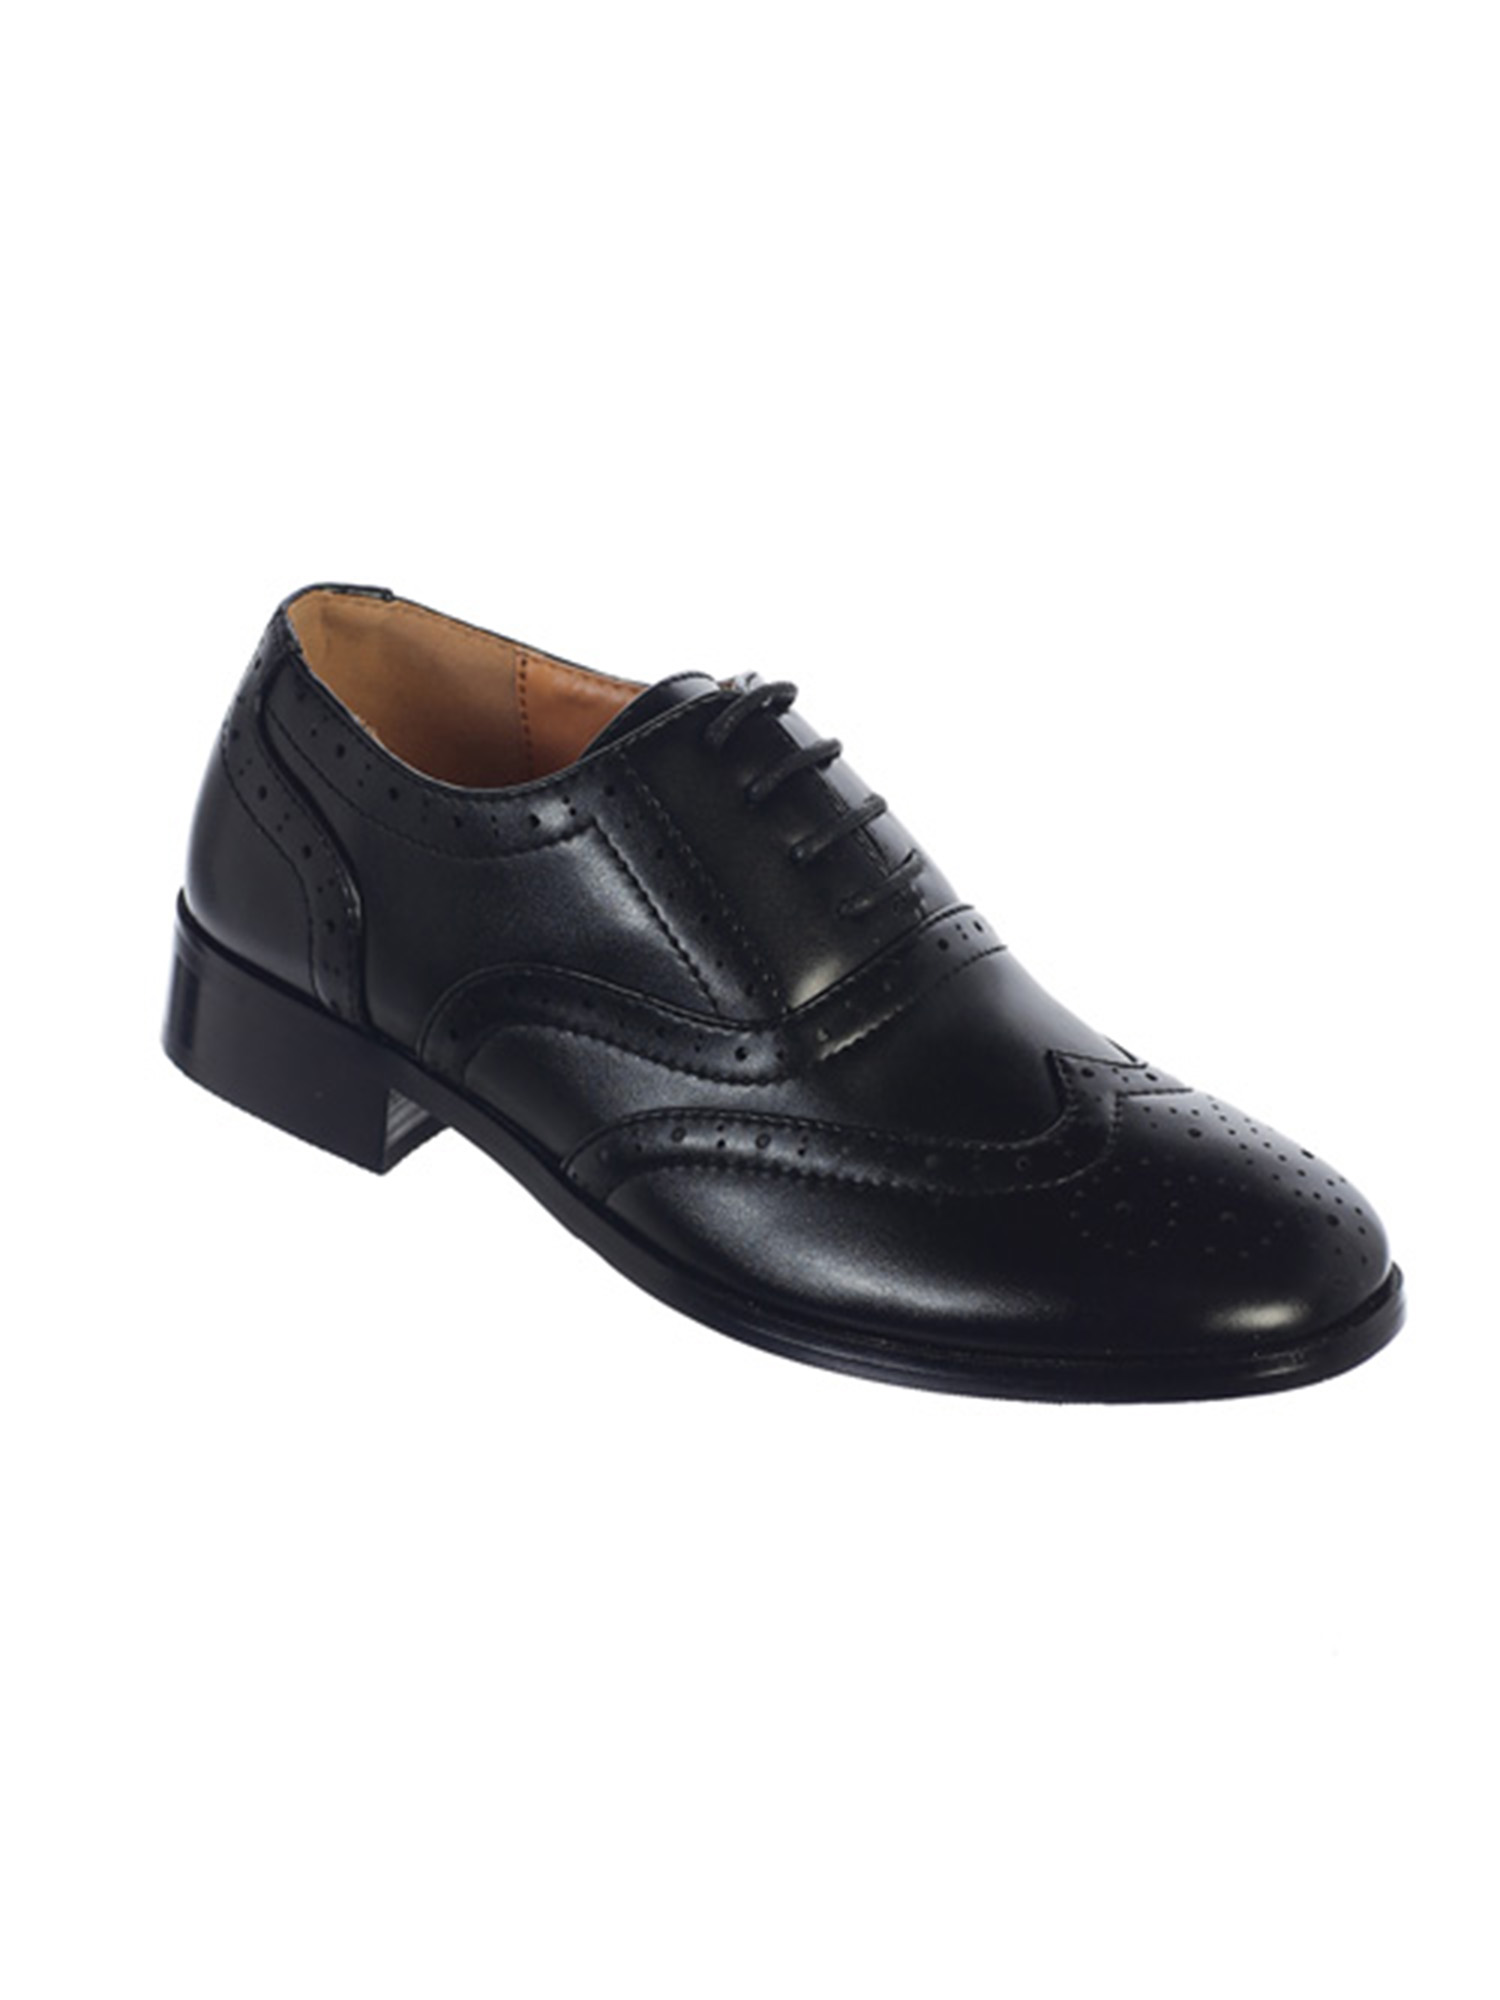 Avery Hill Boys Lace-Up Formal Oxford Style Special Occasion Dress Shoes - Black LittleKid 11